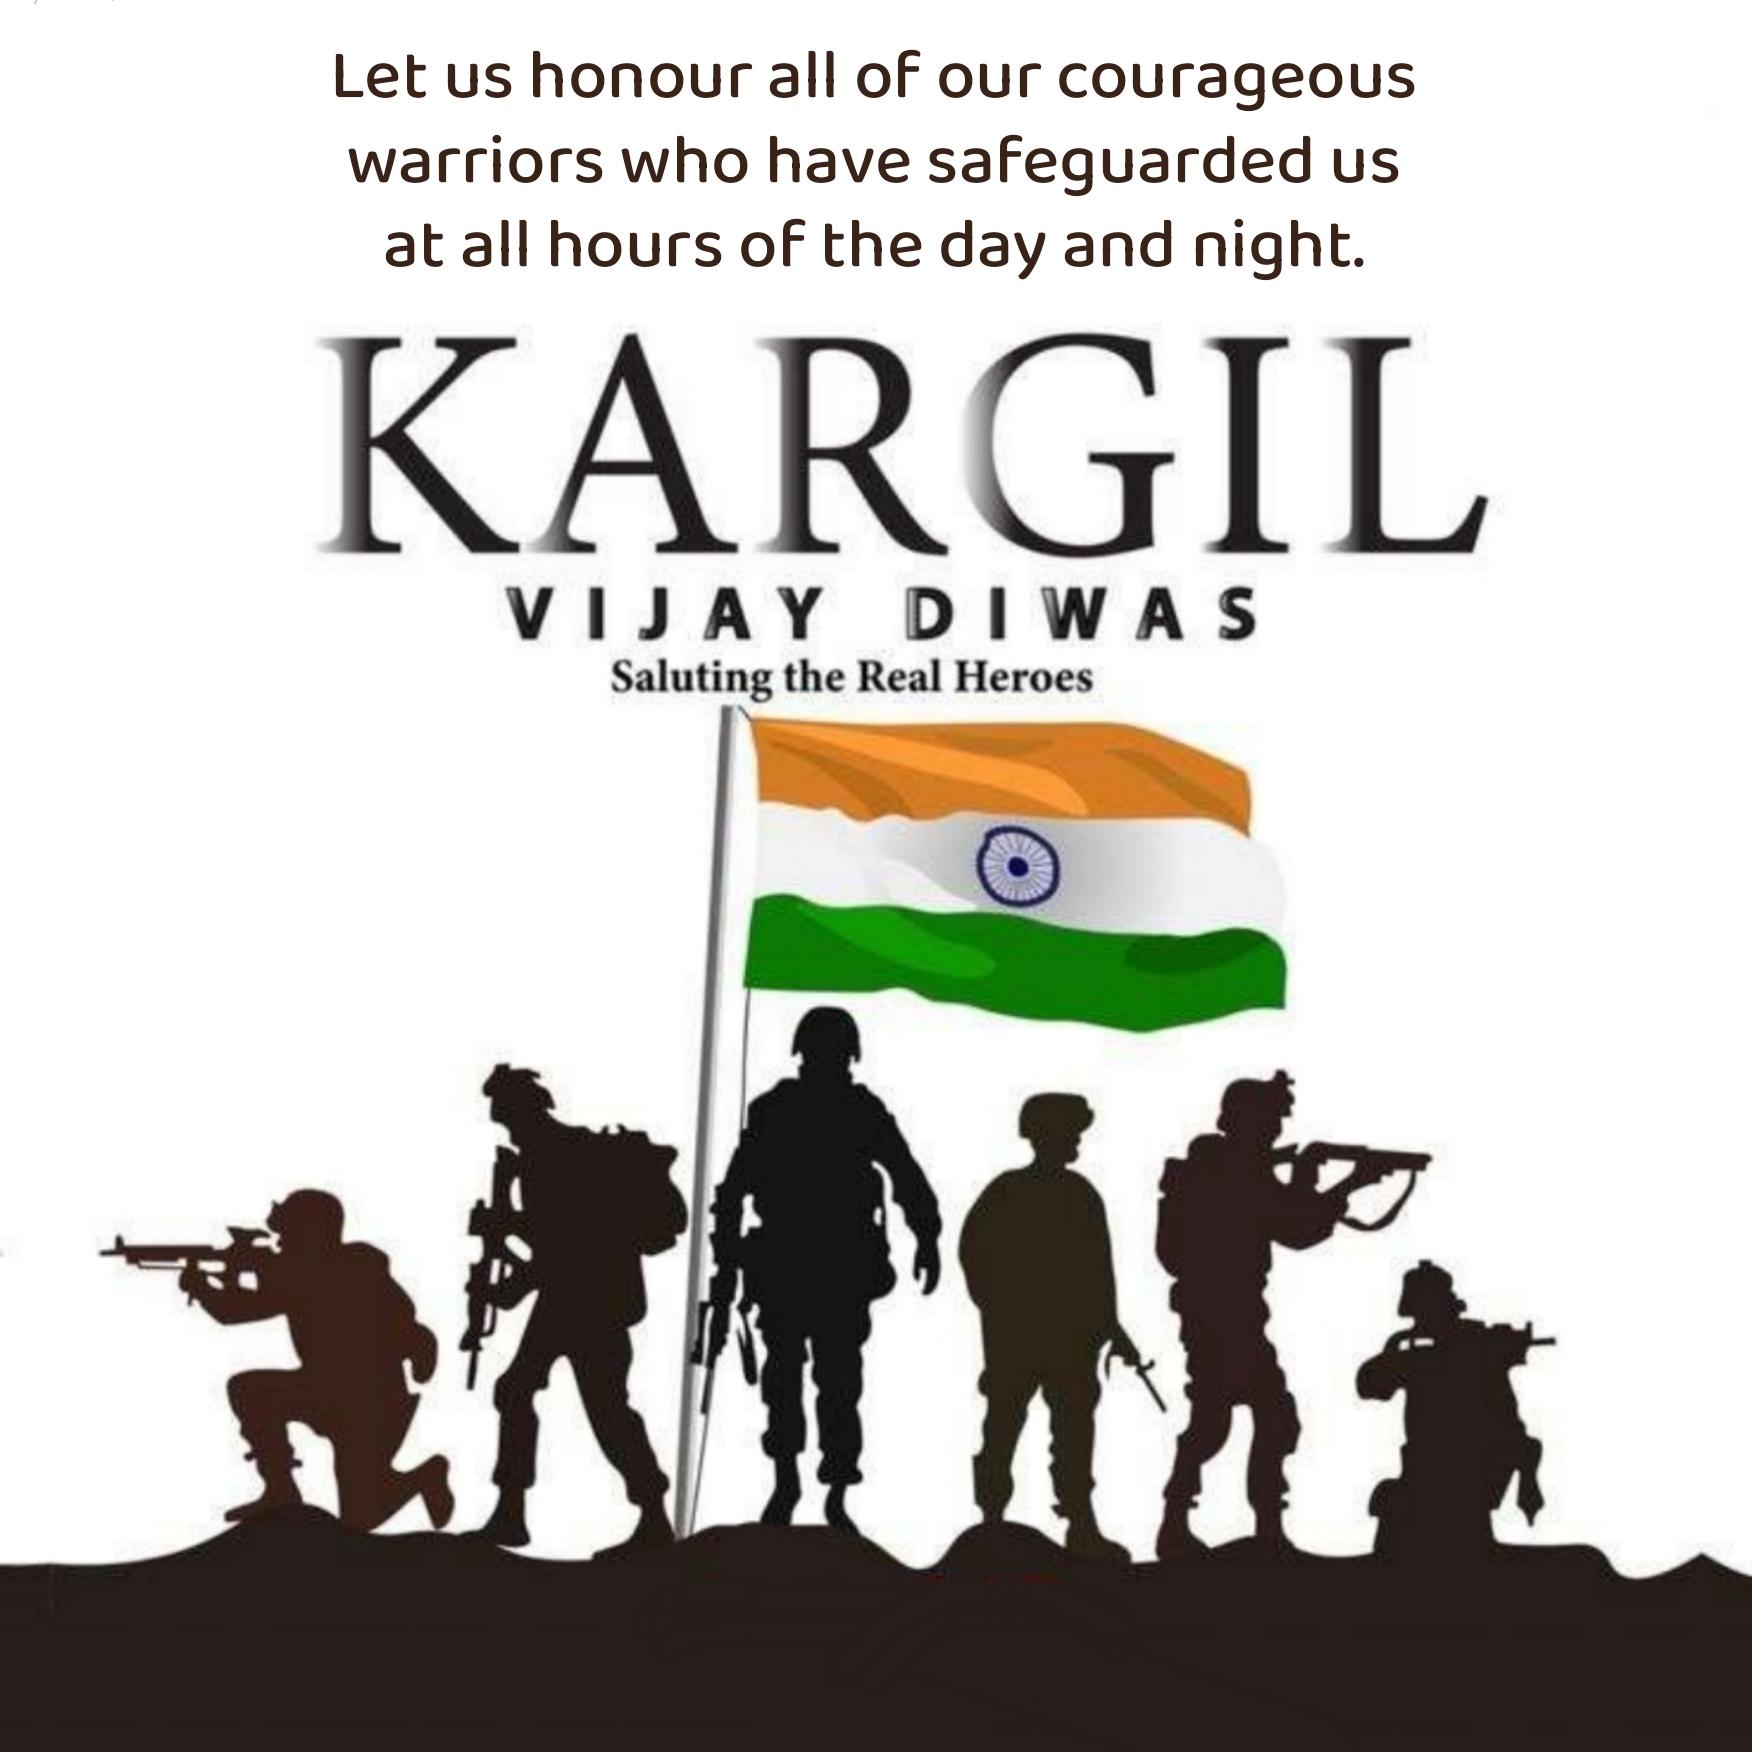 Let us honour all of our courageous warriors who have safeguarded us